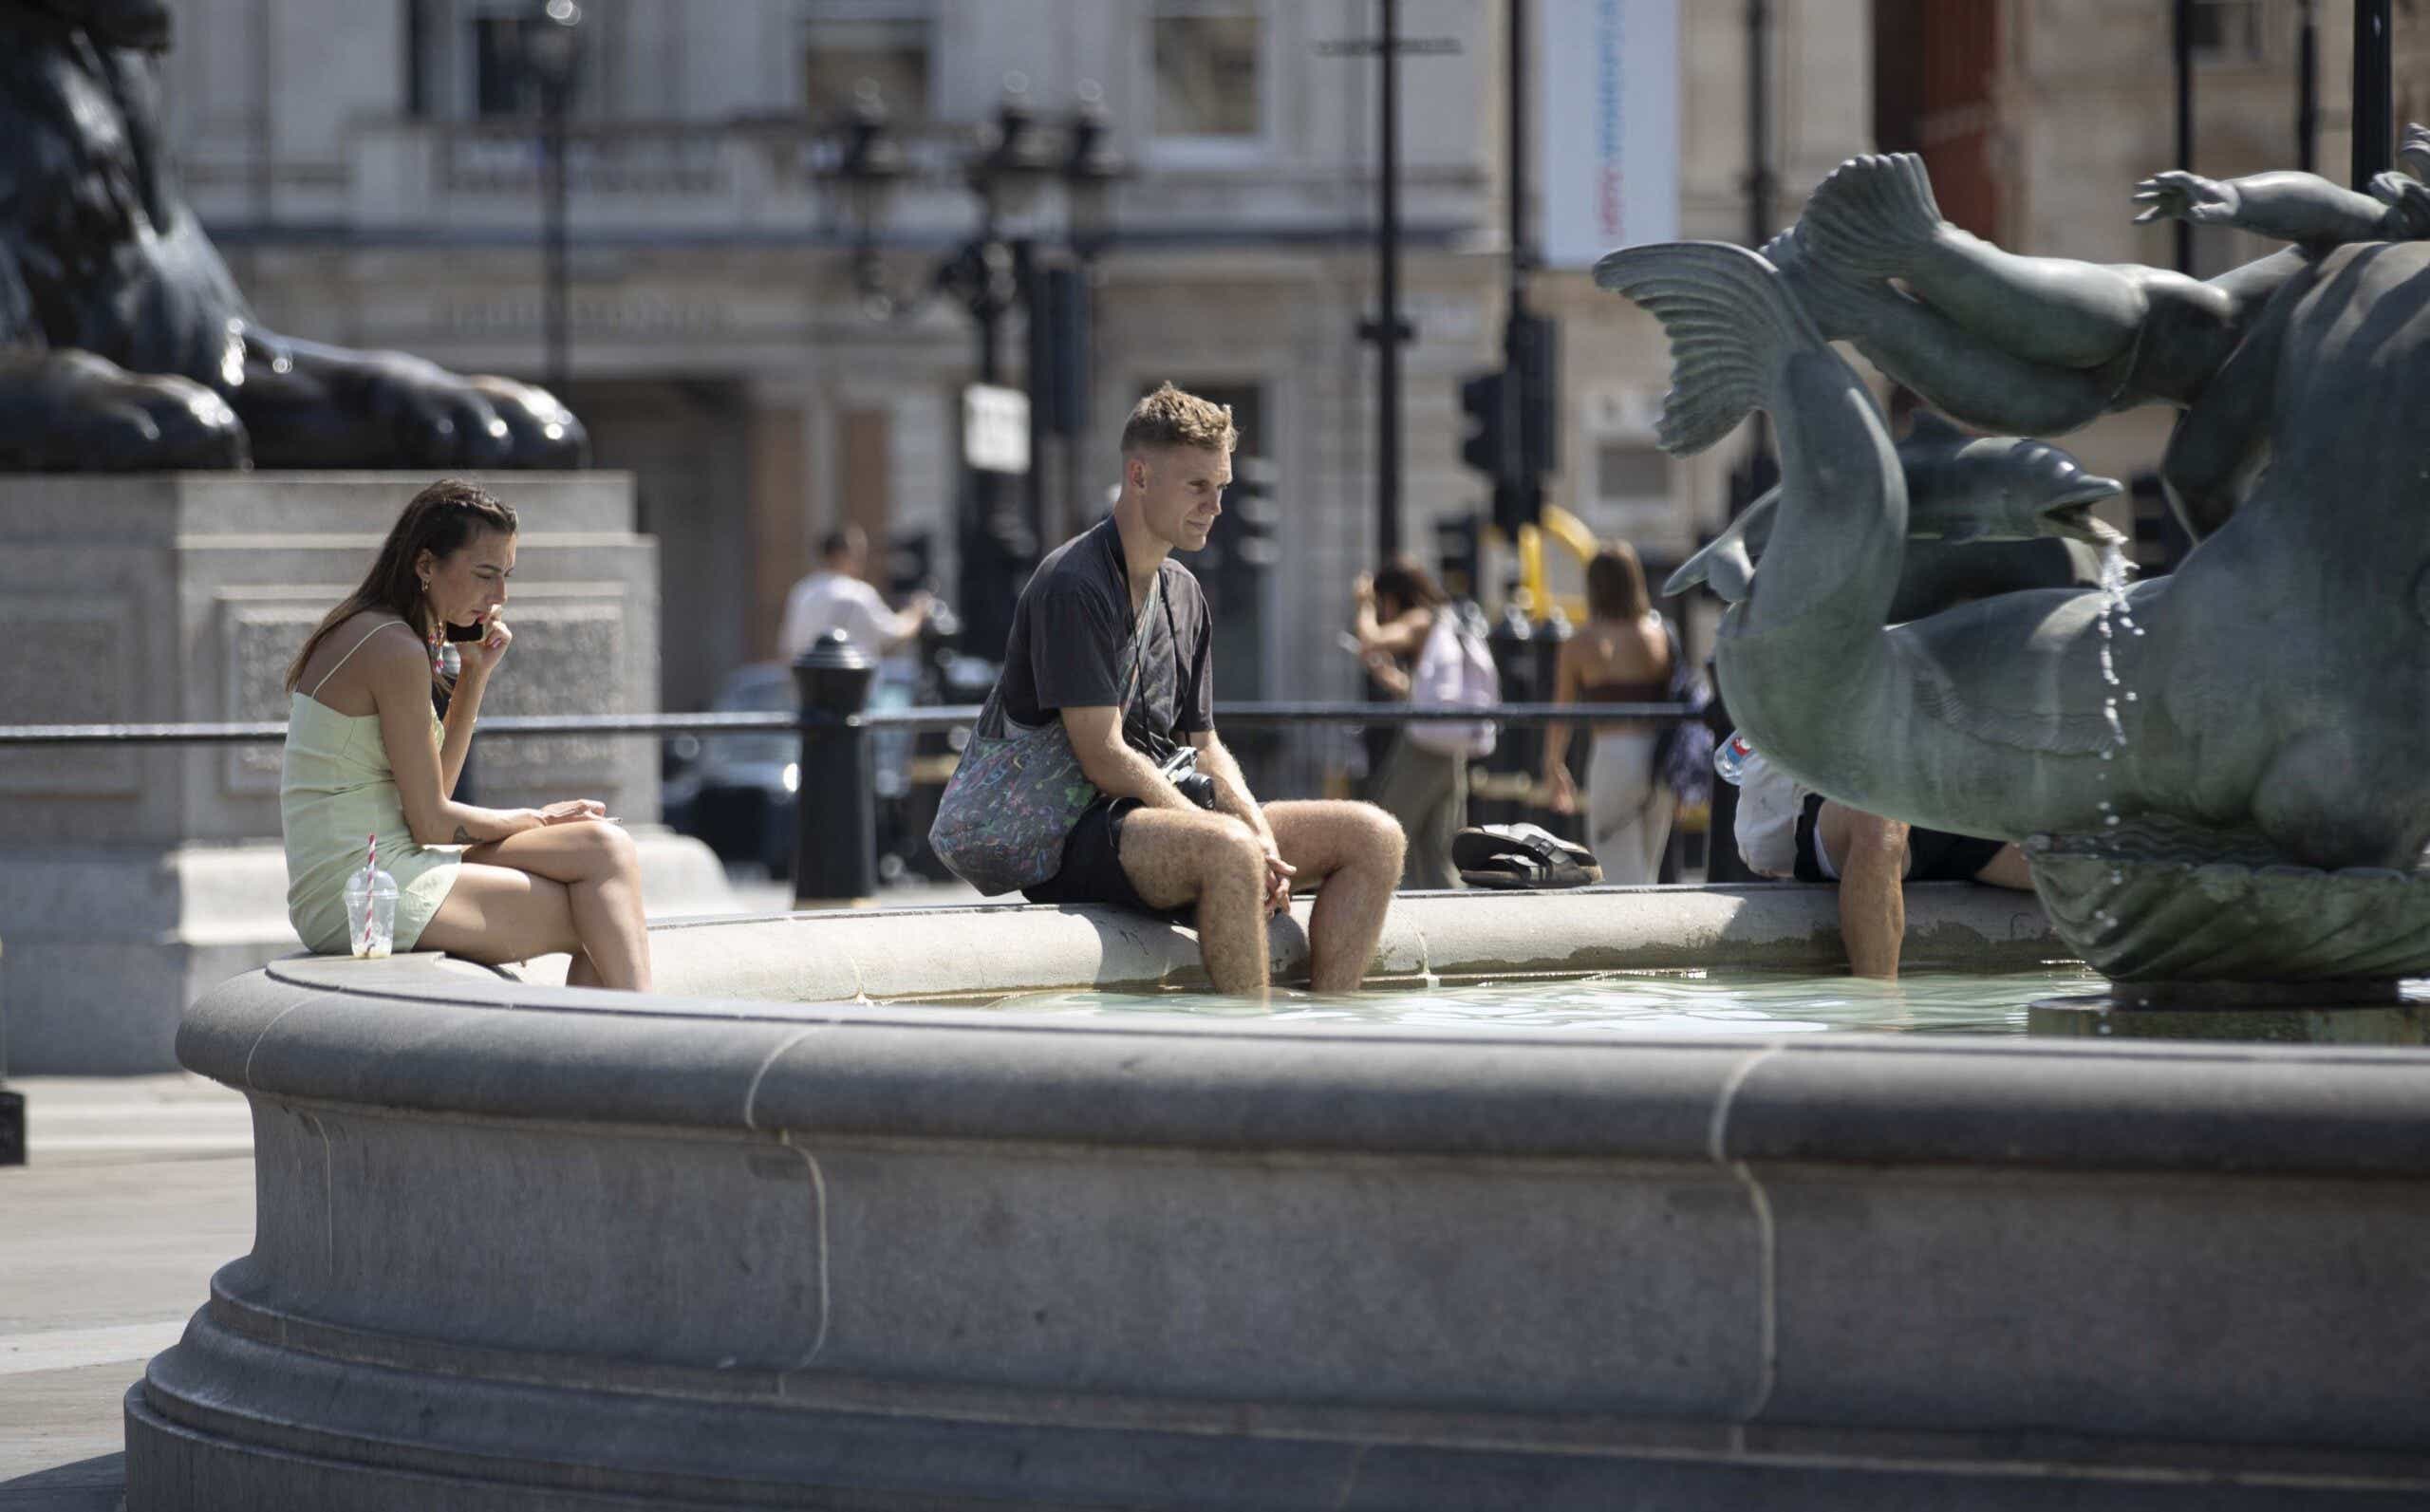 Londoners try to cool off in Trafalgar Square's fountain